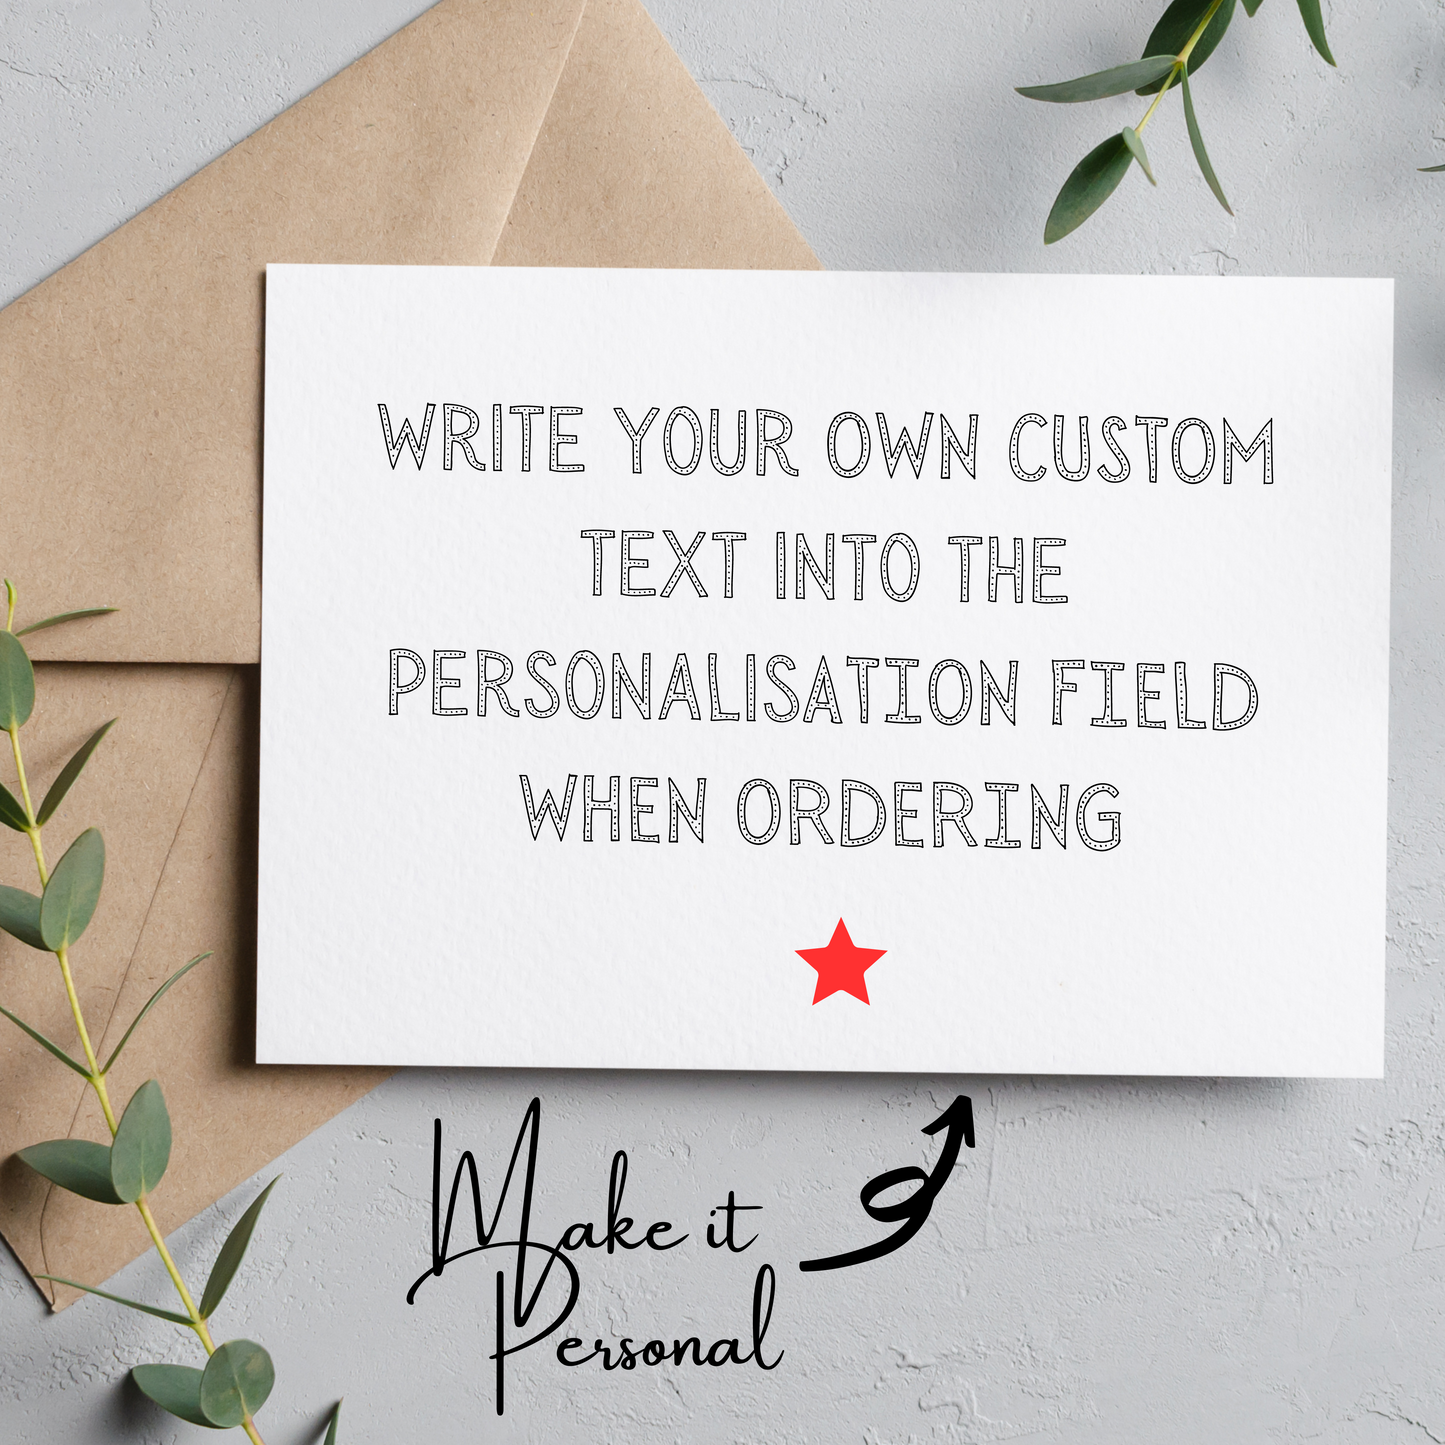 Personalized Cards with Custom Messages for Loved Ones | Elegant Design